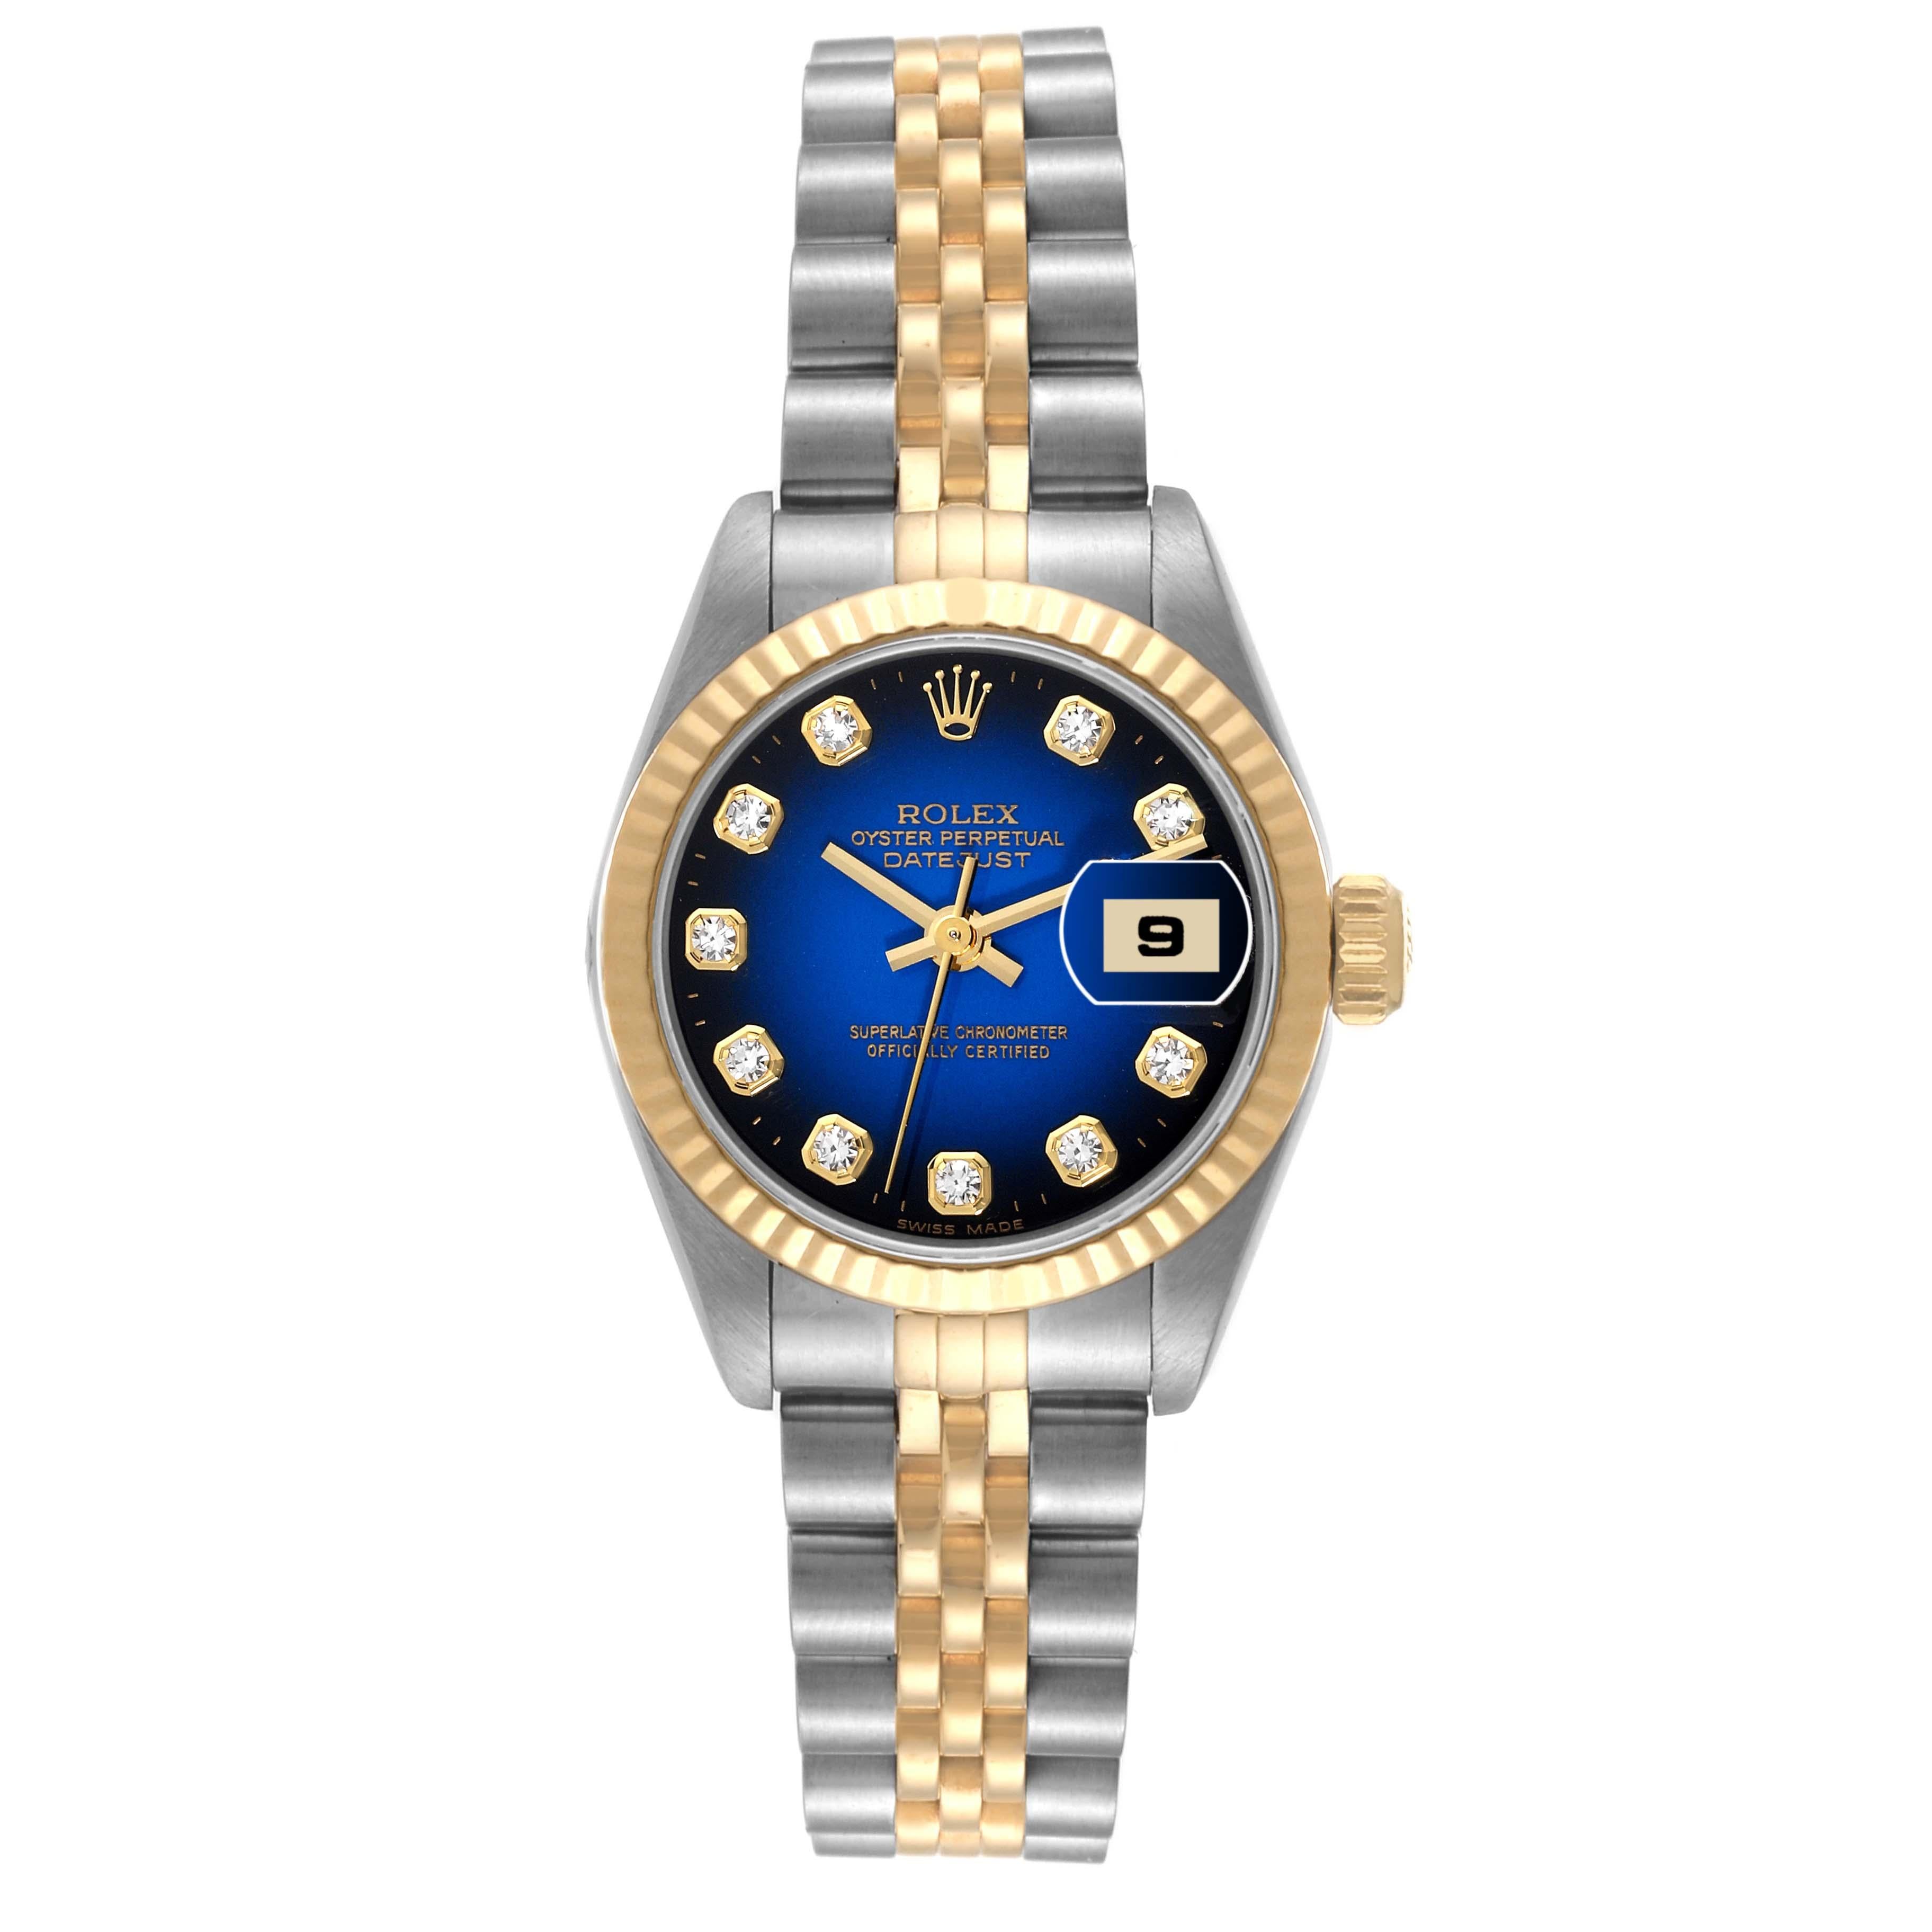 Rolex Datejust Blue Vignette Diamond Dial Steel Yellow Gold Ladies Watch 69173. Officially certified chronometer automatic self-winding movement. Stainless steel oyster case 26.0 mm in diameter. Rolex logo on the crown. 18k yellow gold fluted bezel.